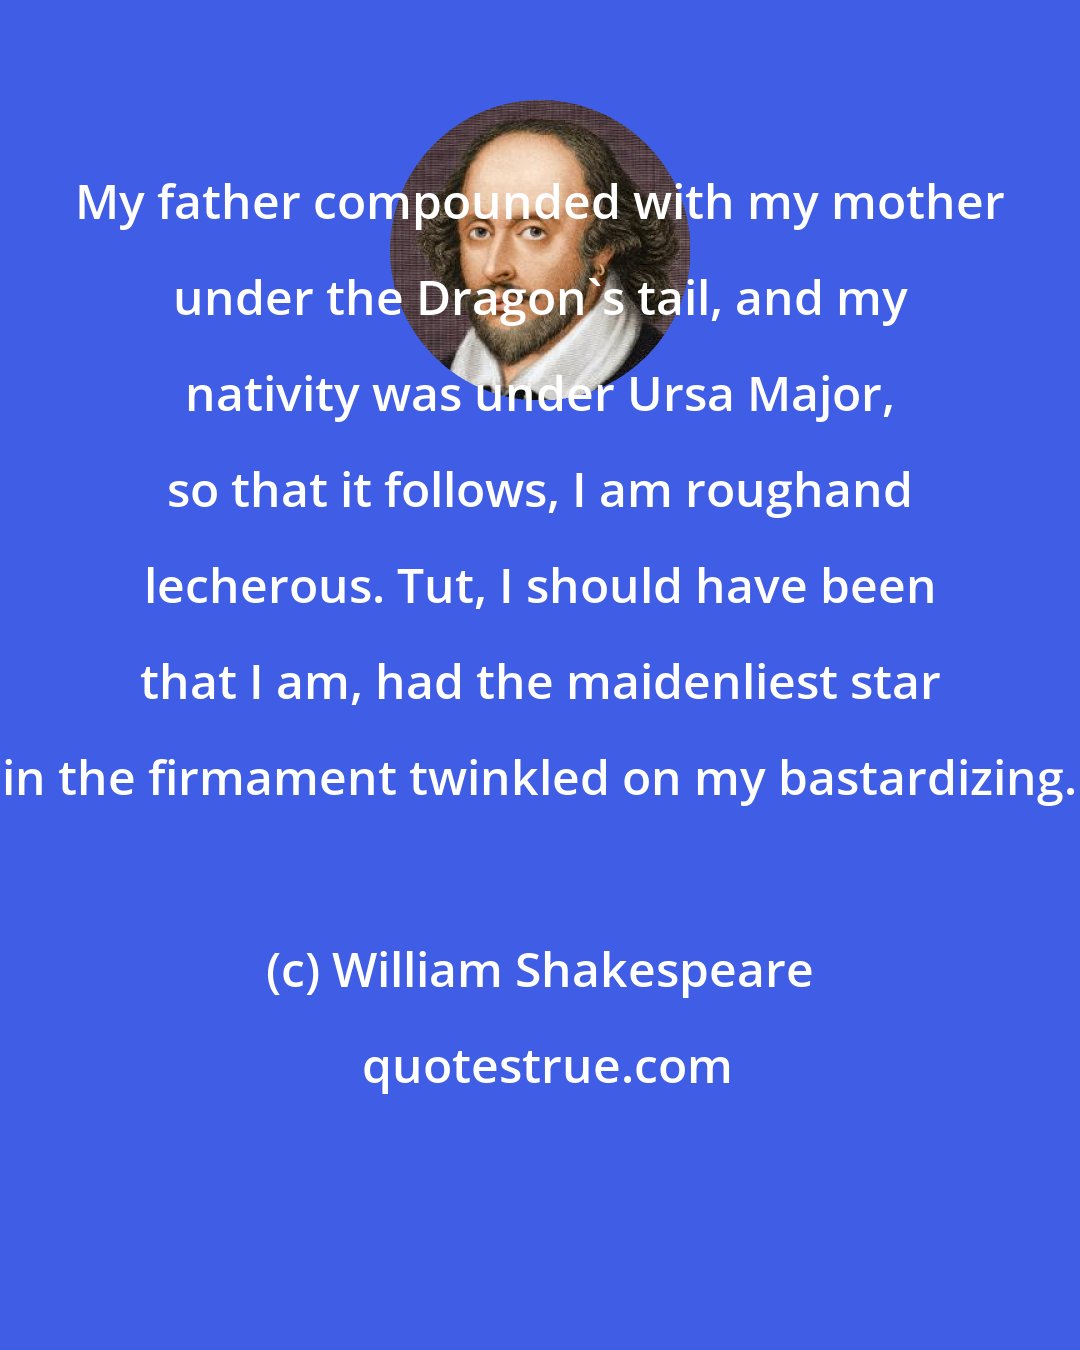 William Shakespeare: My father compounded with my mother under the Dragon's tail, and my nativity was under Ursa Major, so that it follows, I am roughand lecherous. Tut, I should have been that I am, had the maidenliest star in the firmament twinkled on my bastardizing.